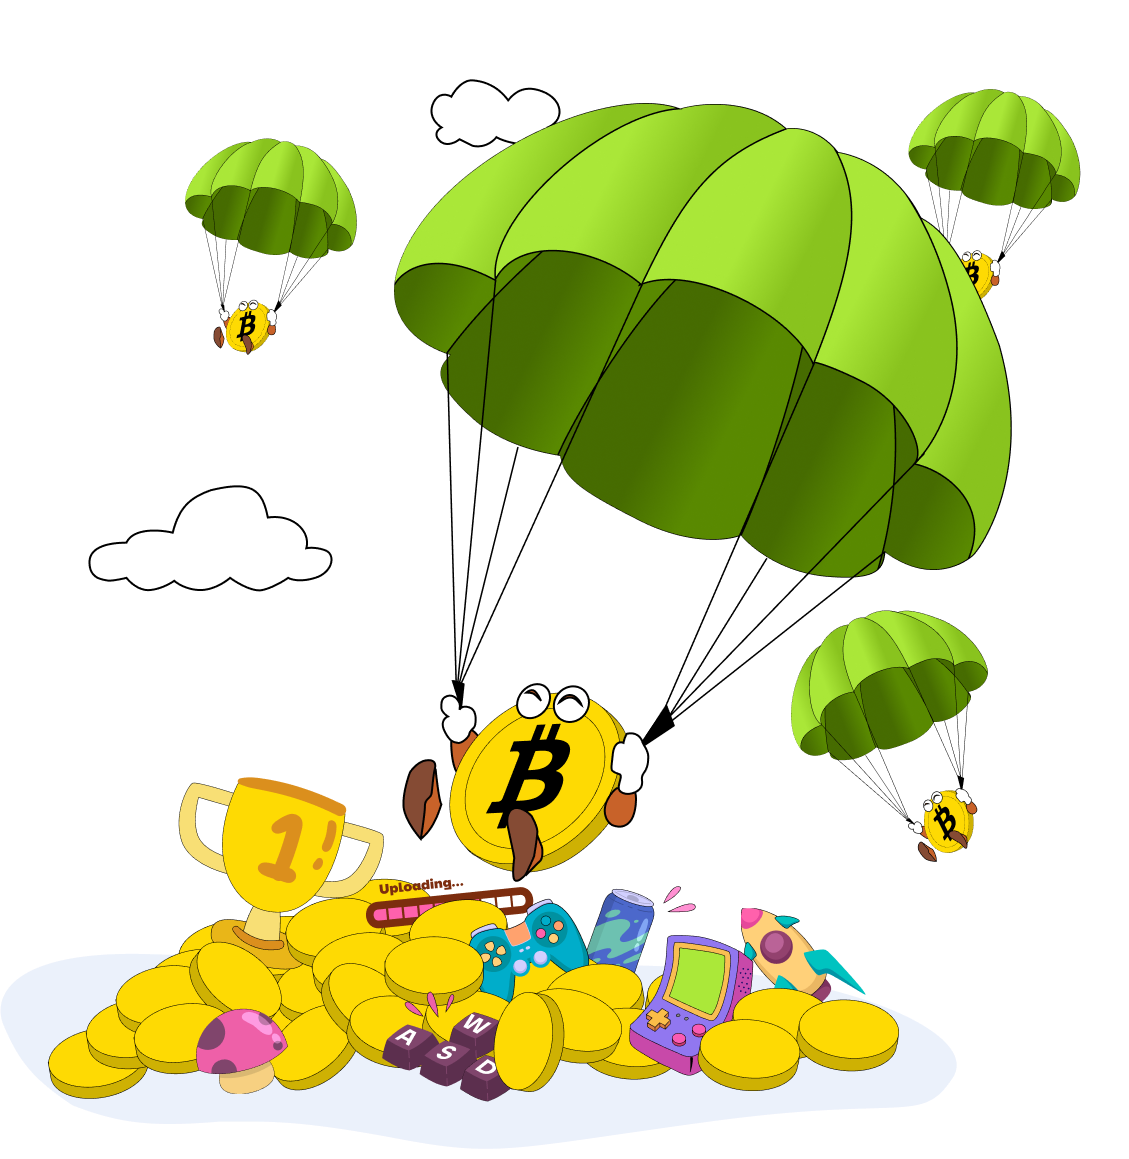 Crypto airdrop game, play and earn Bitcoin